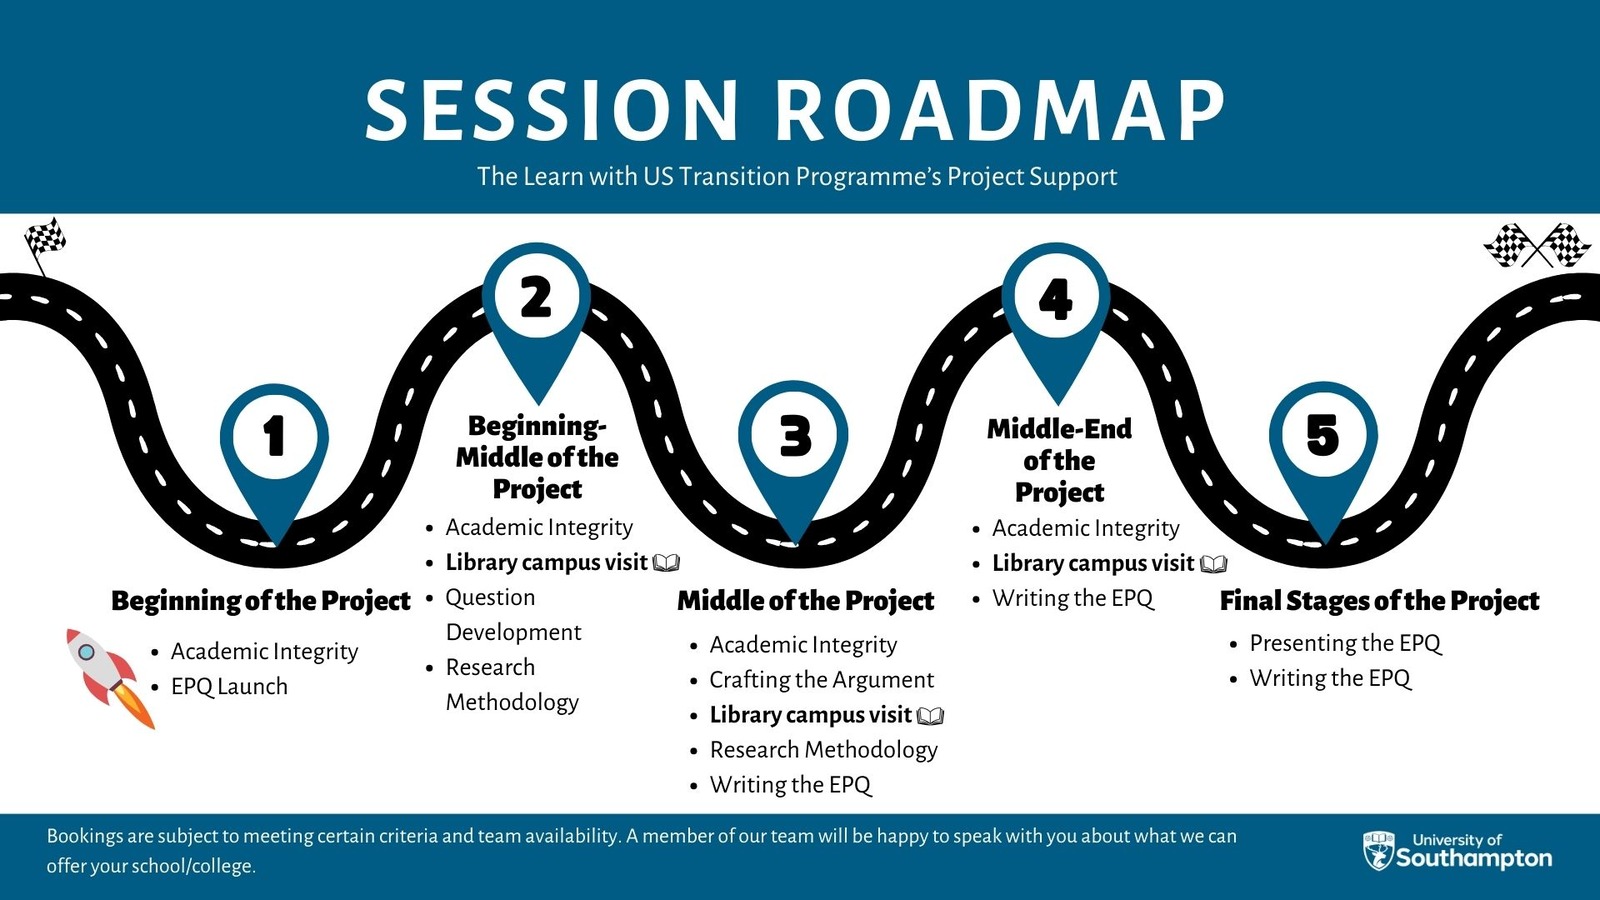 infographic depicting the appropriate and approximate timings for each session.